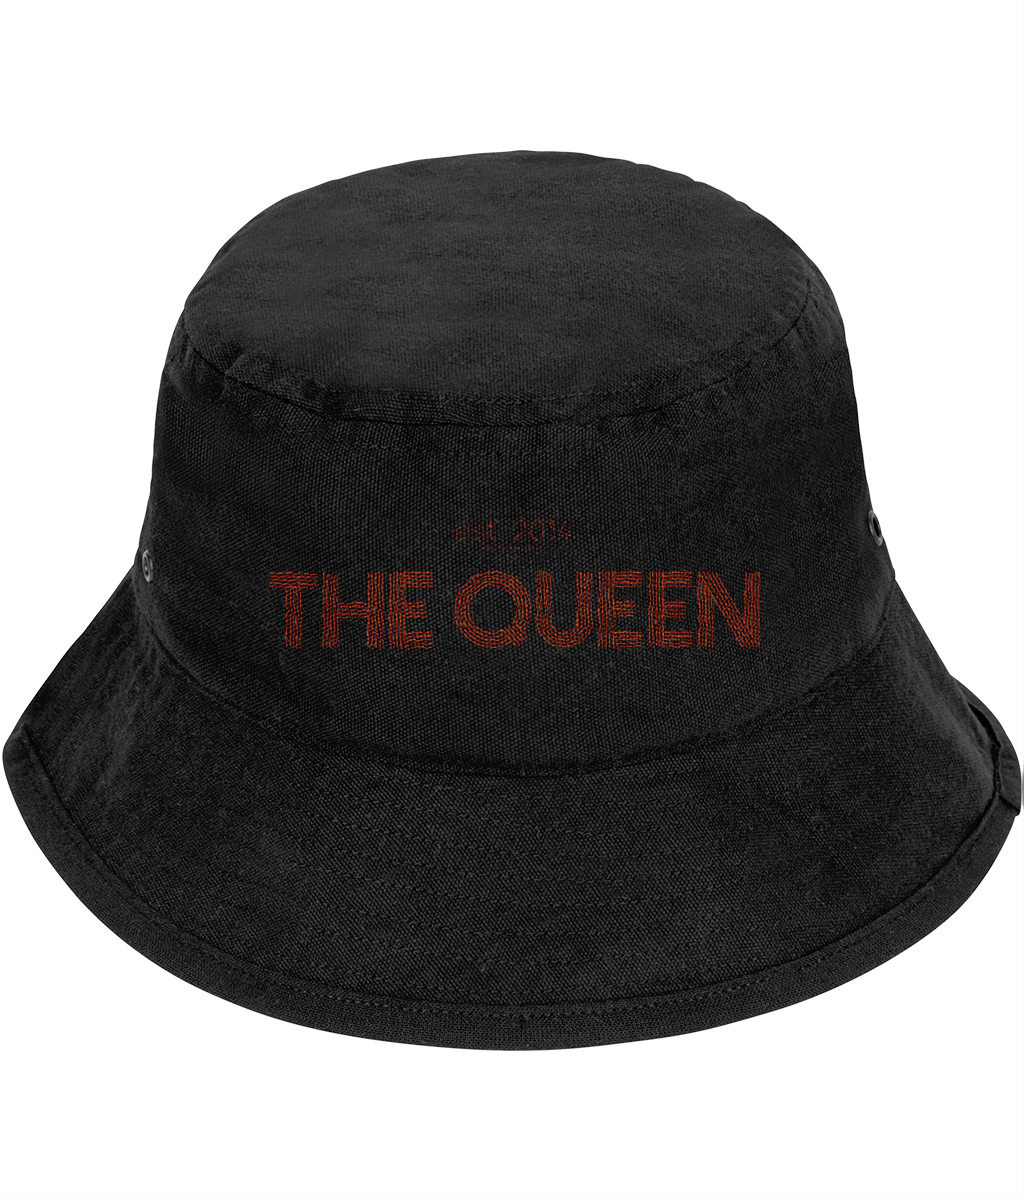 The Queen Bucket Hat | Embroidered